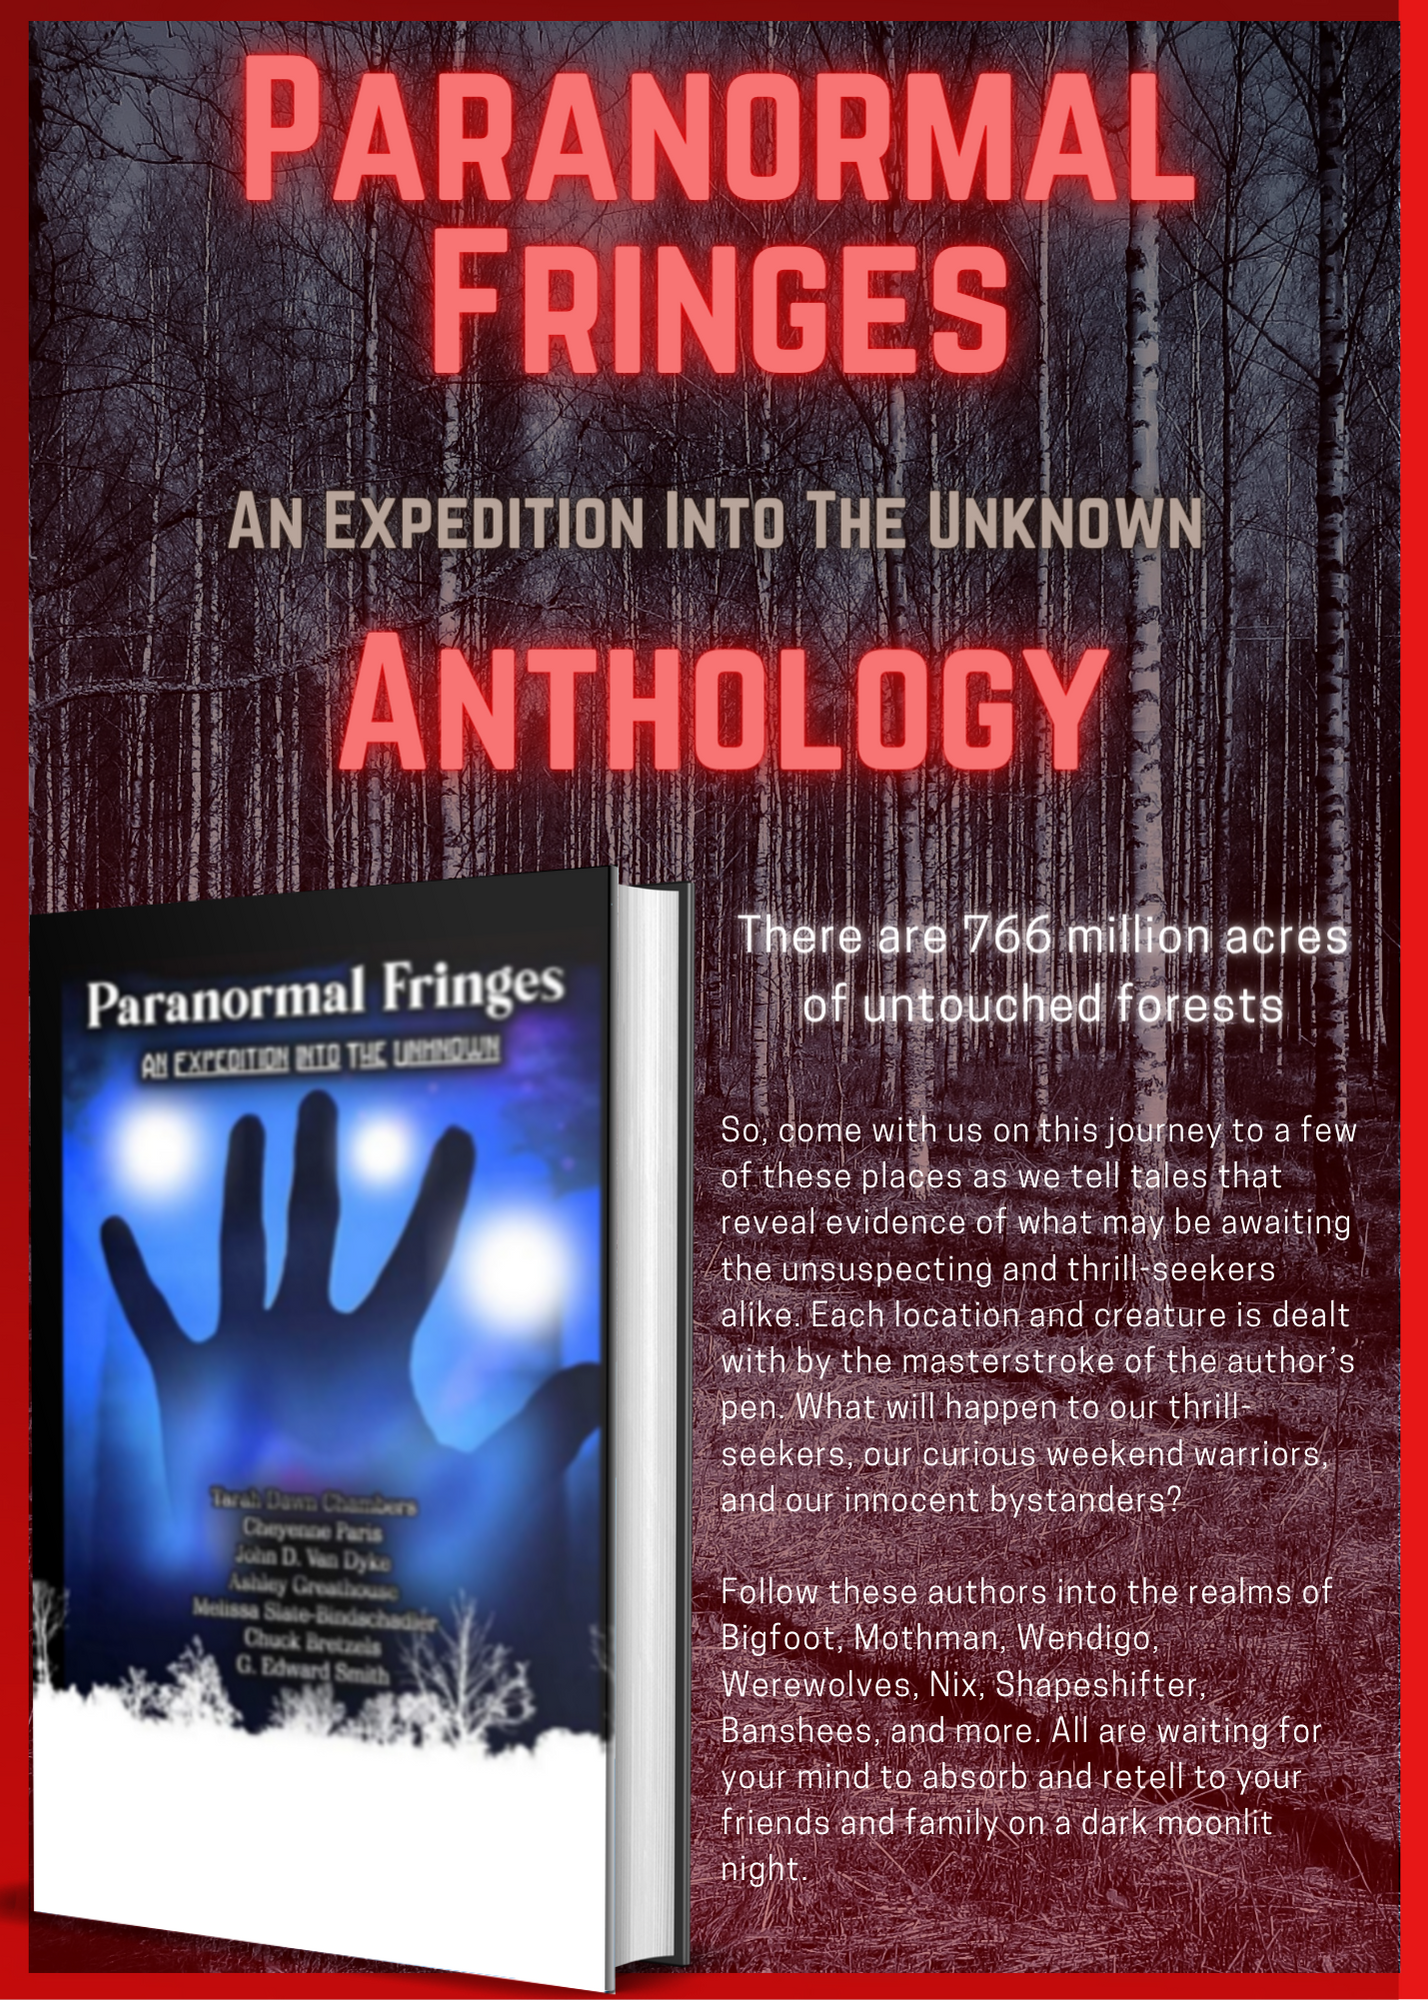 Paranormal Fringes